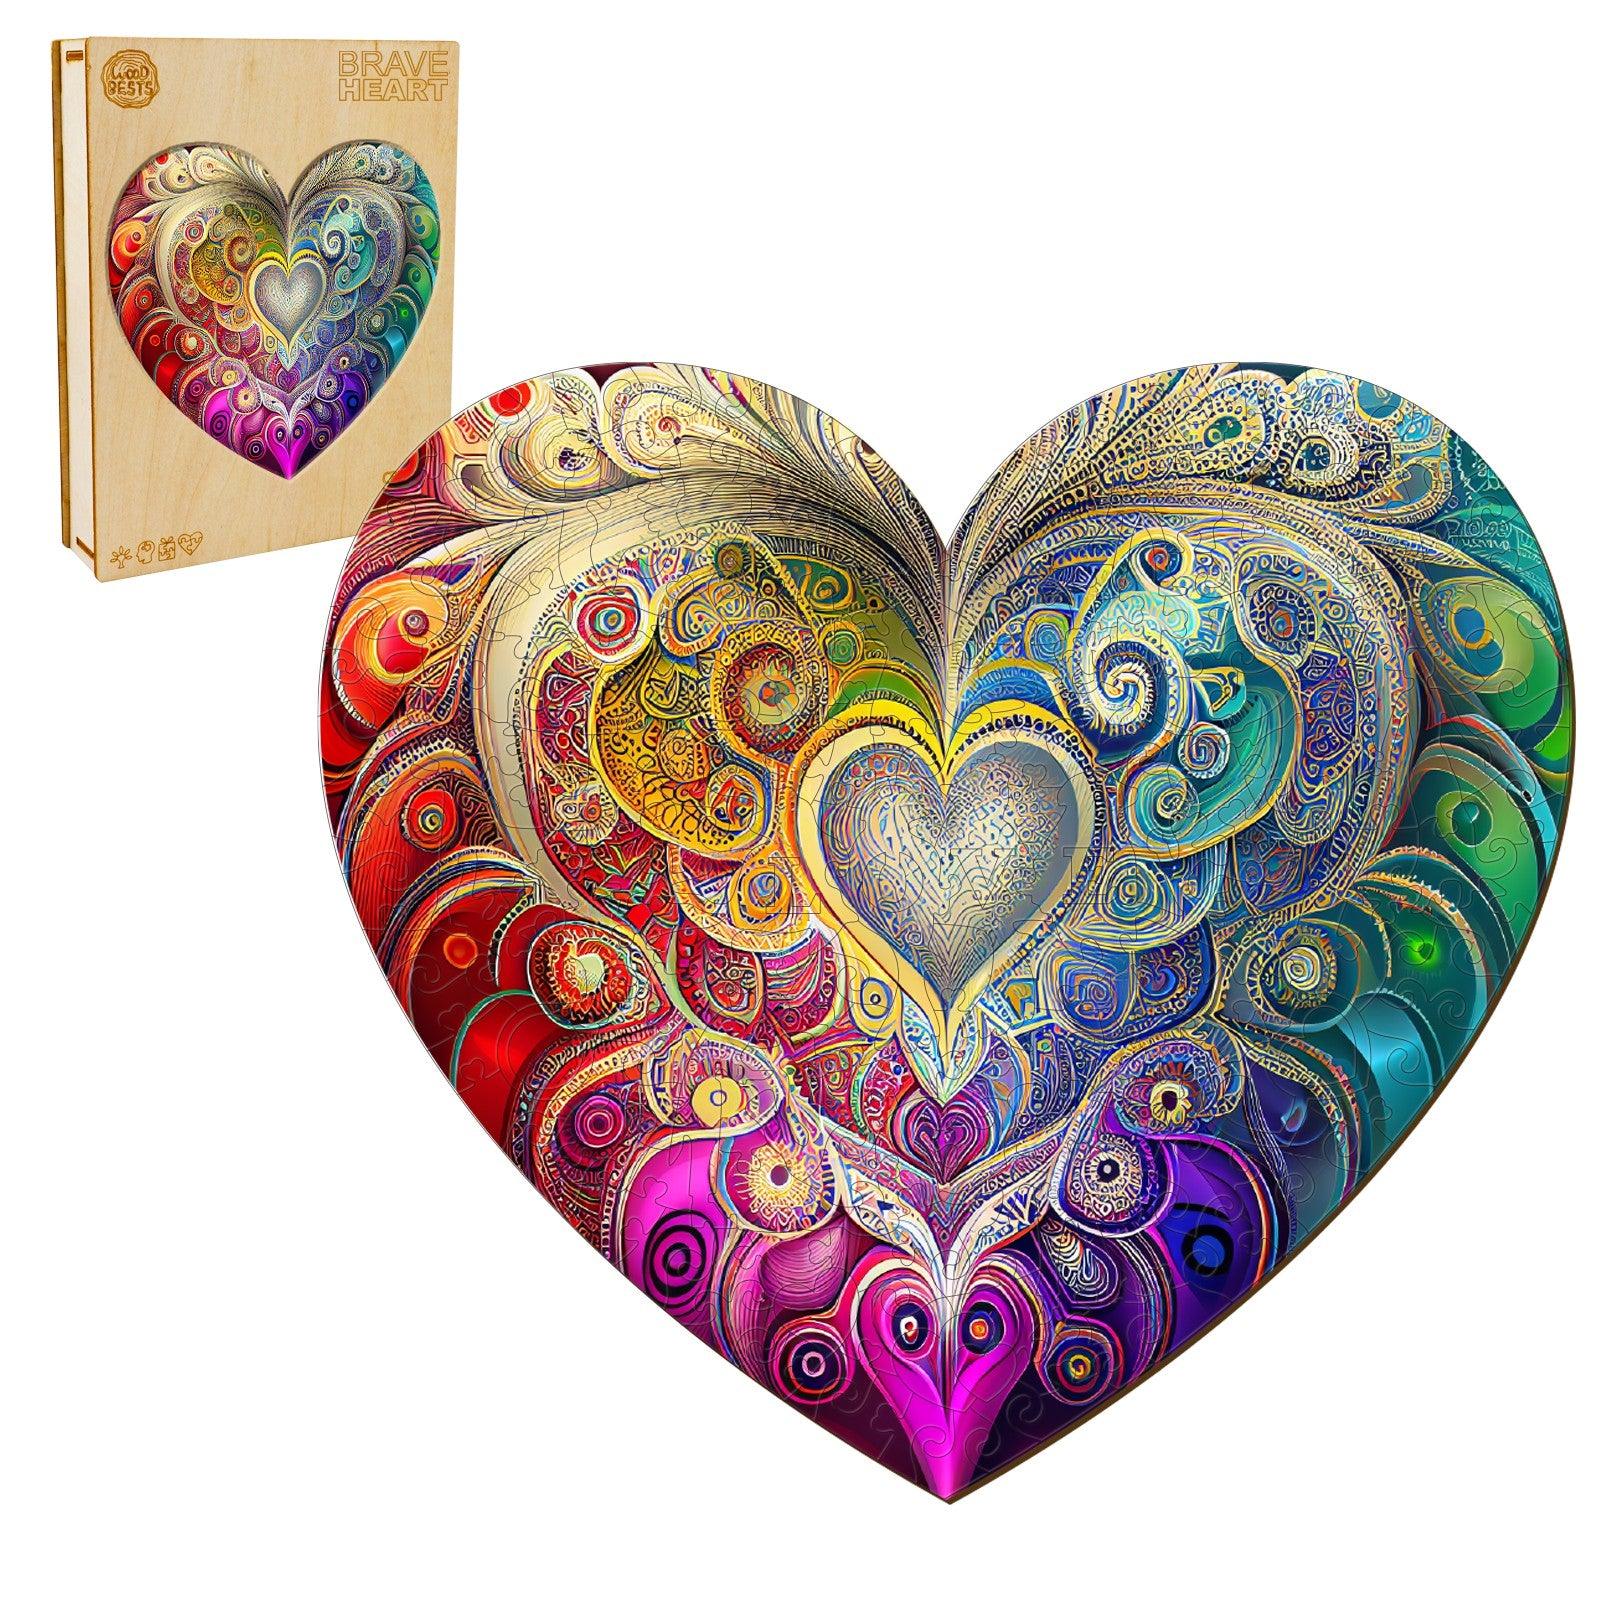 Brave Heart Wooden Jigsaw Puzzle